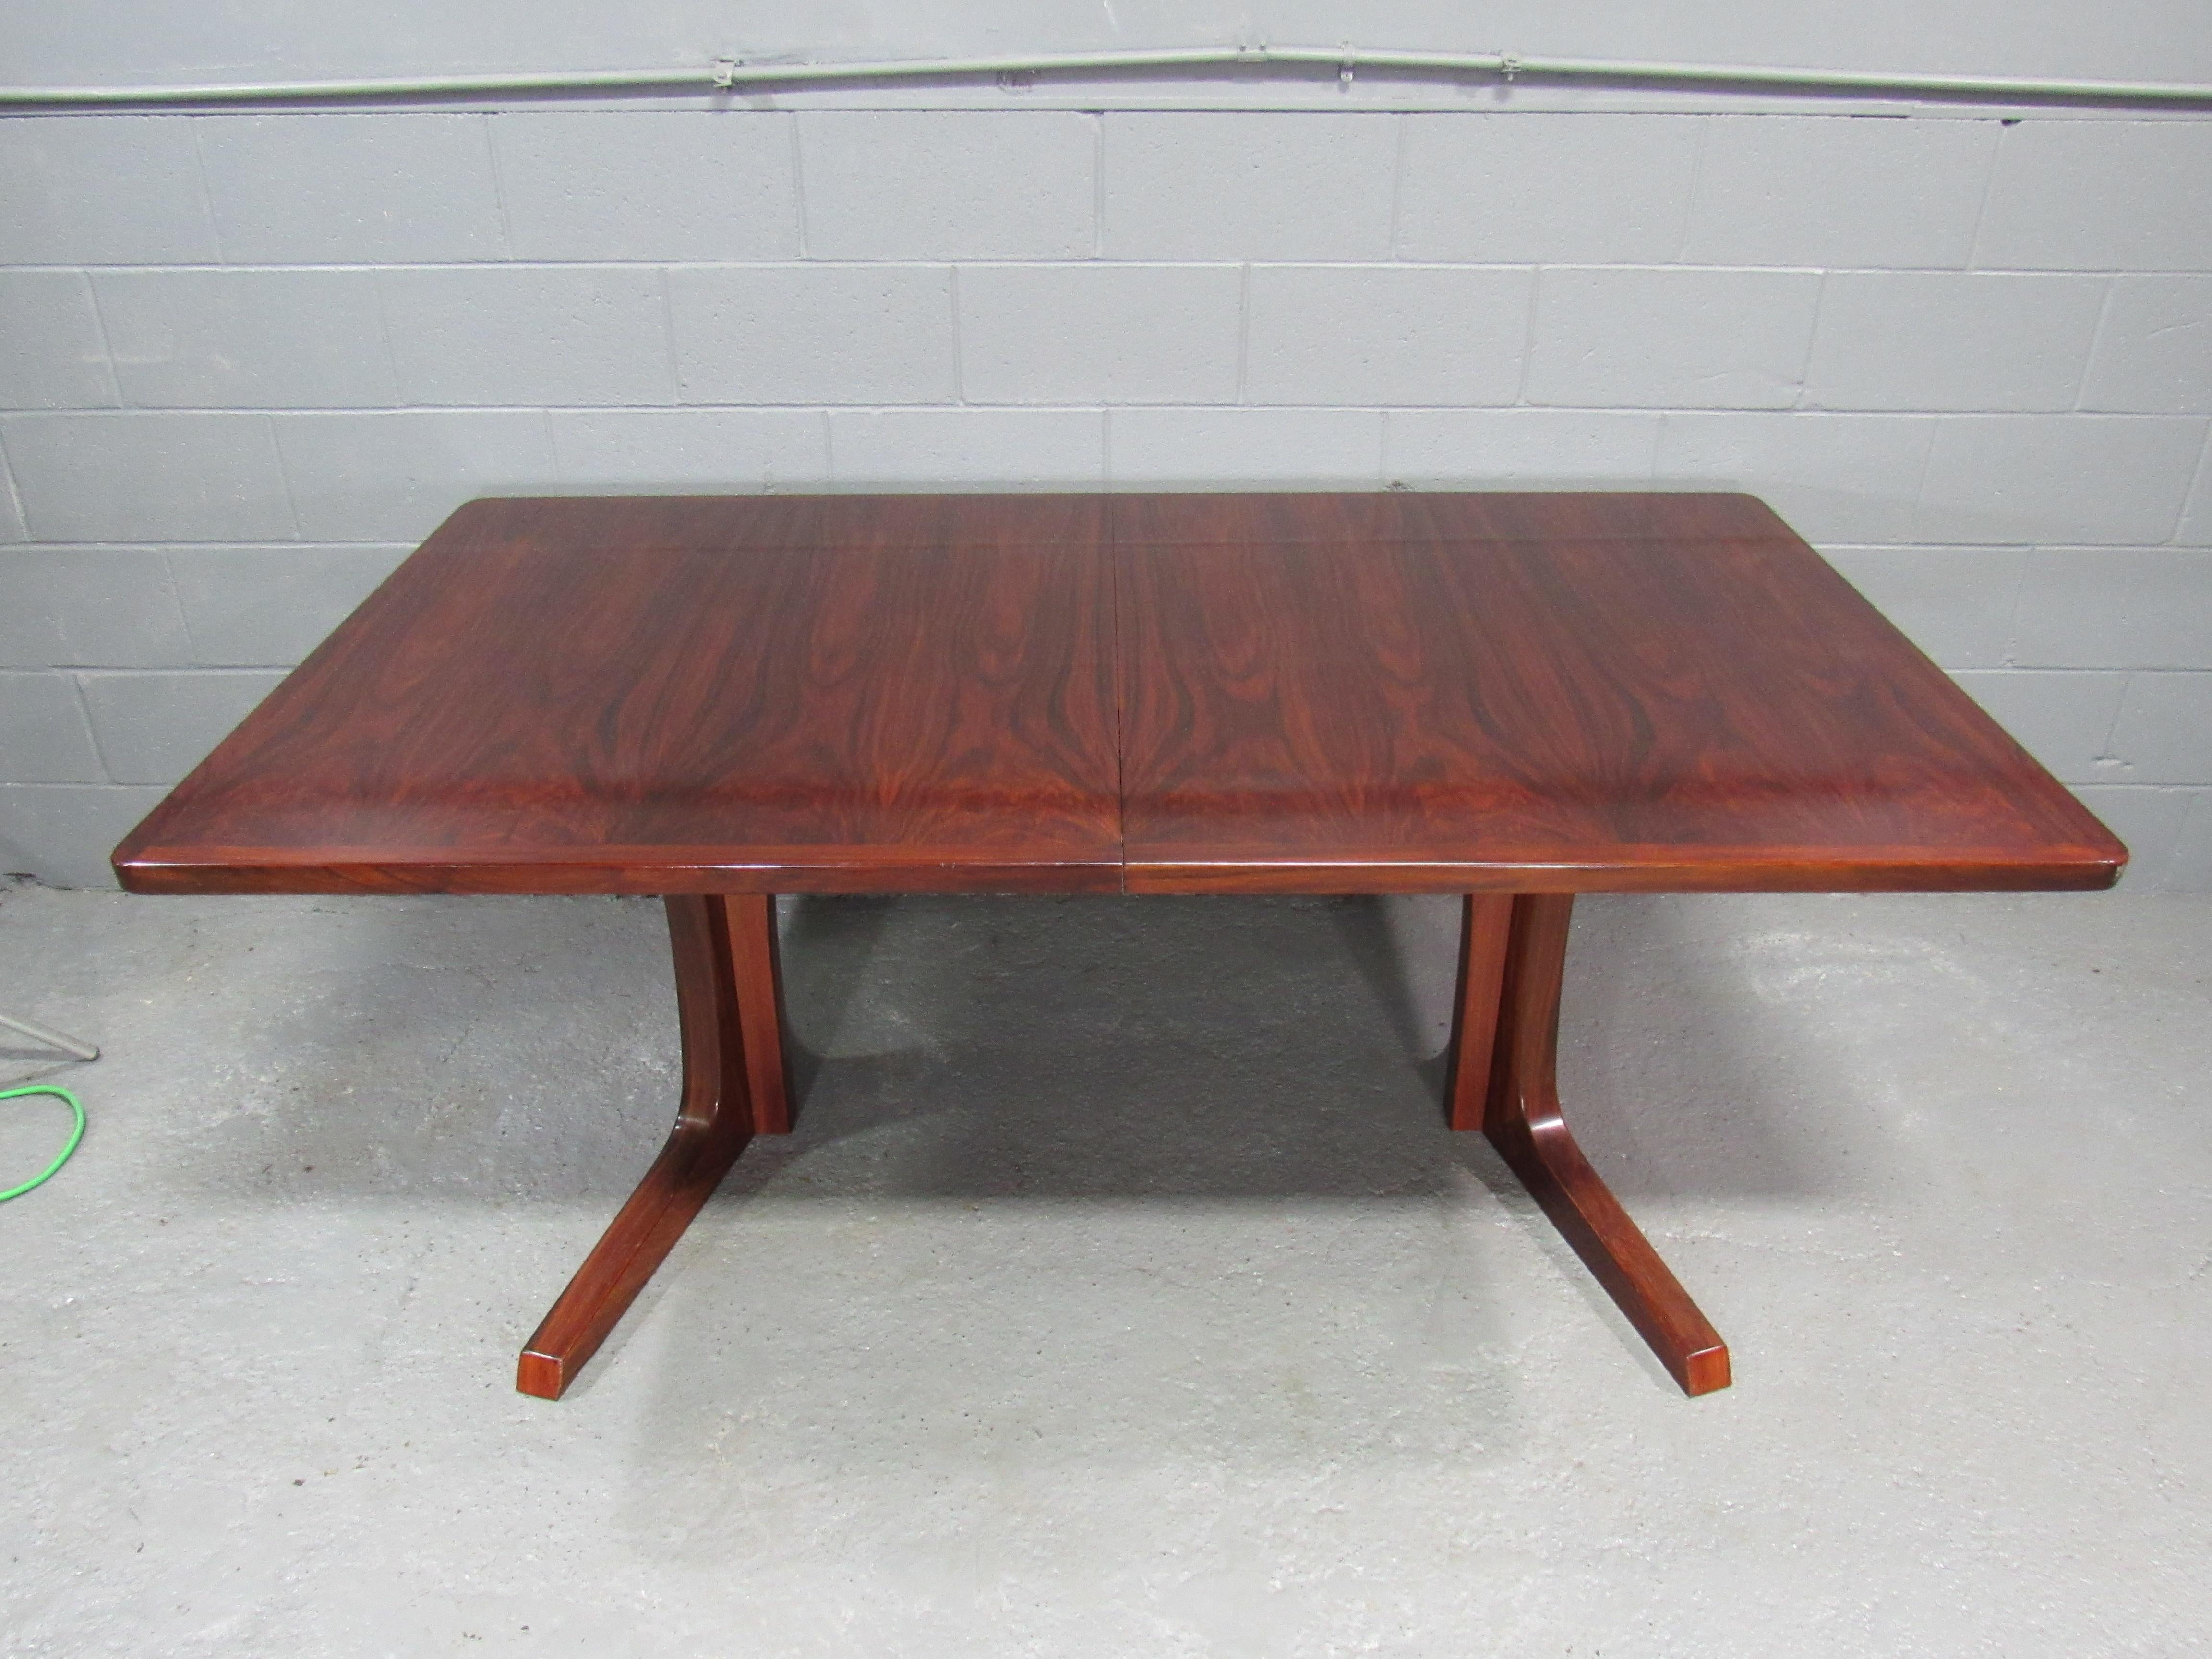 Mid-Century Danish Modern Rosewood Extension Dining Table by Gudme Mobelfabrik. Leaf self stores under table top.  One 19 1/4 in. leaf included.